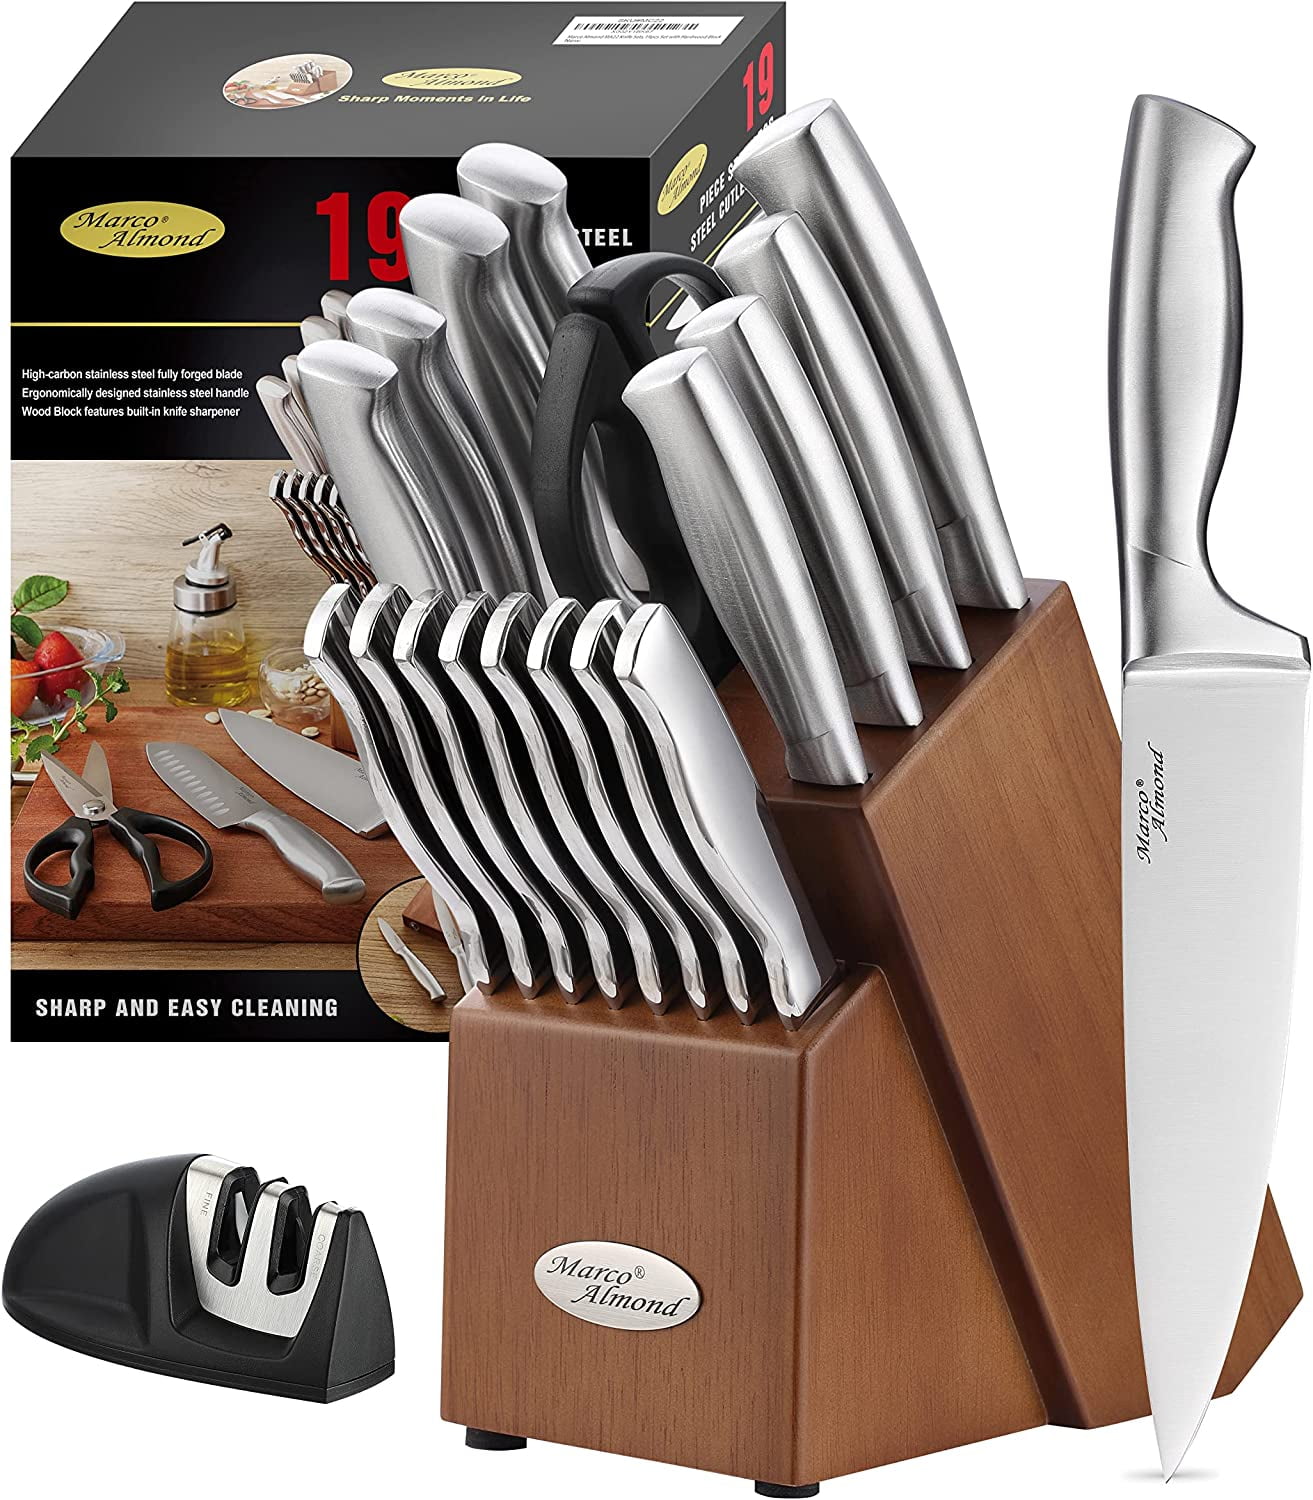 Marco Almond Kya28 14-Piece Stainless Steel Cutlery Kitchen Knife Set with Block,Built-in Sharpener, Silver